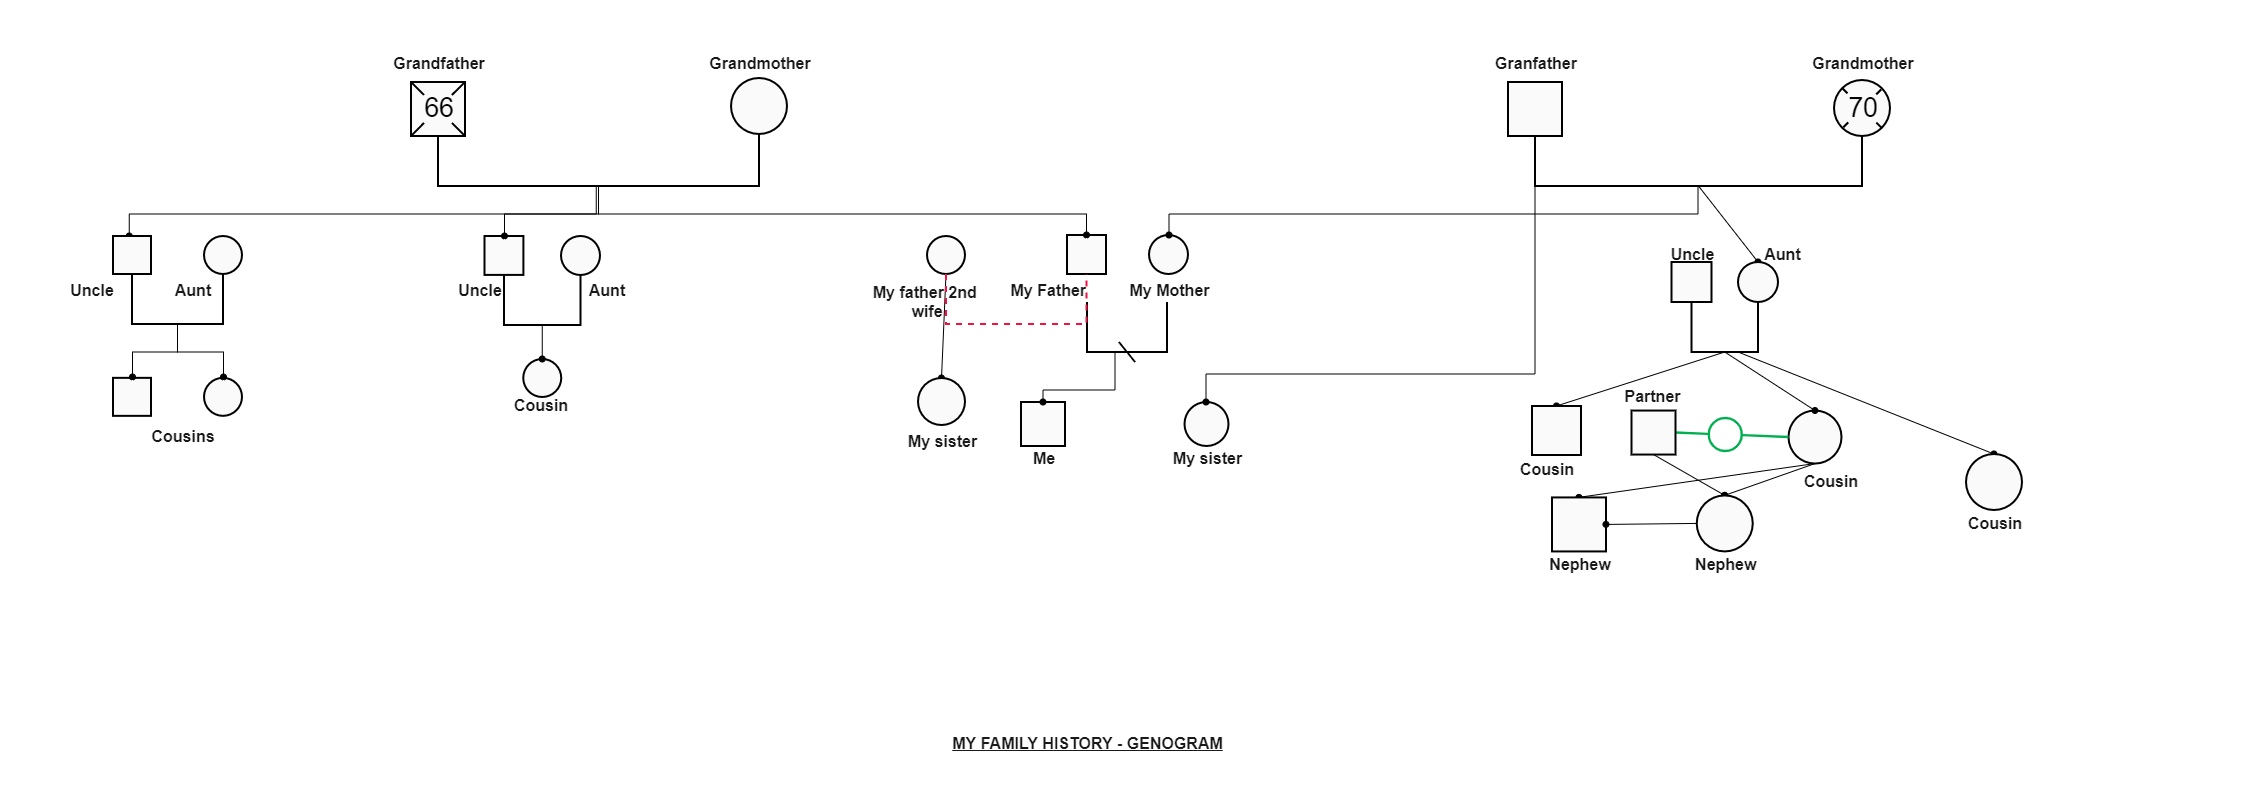 My entire family genogram structure is shown here.  A genogram is created with simple symbols representing the gender, with various lines to illustrate family relationships. Some genogram users also put circles around members who live in the same living s